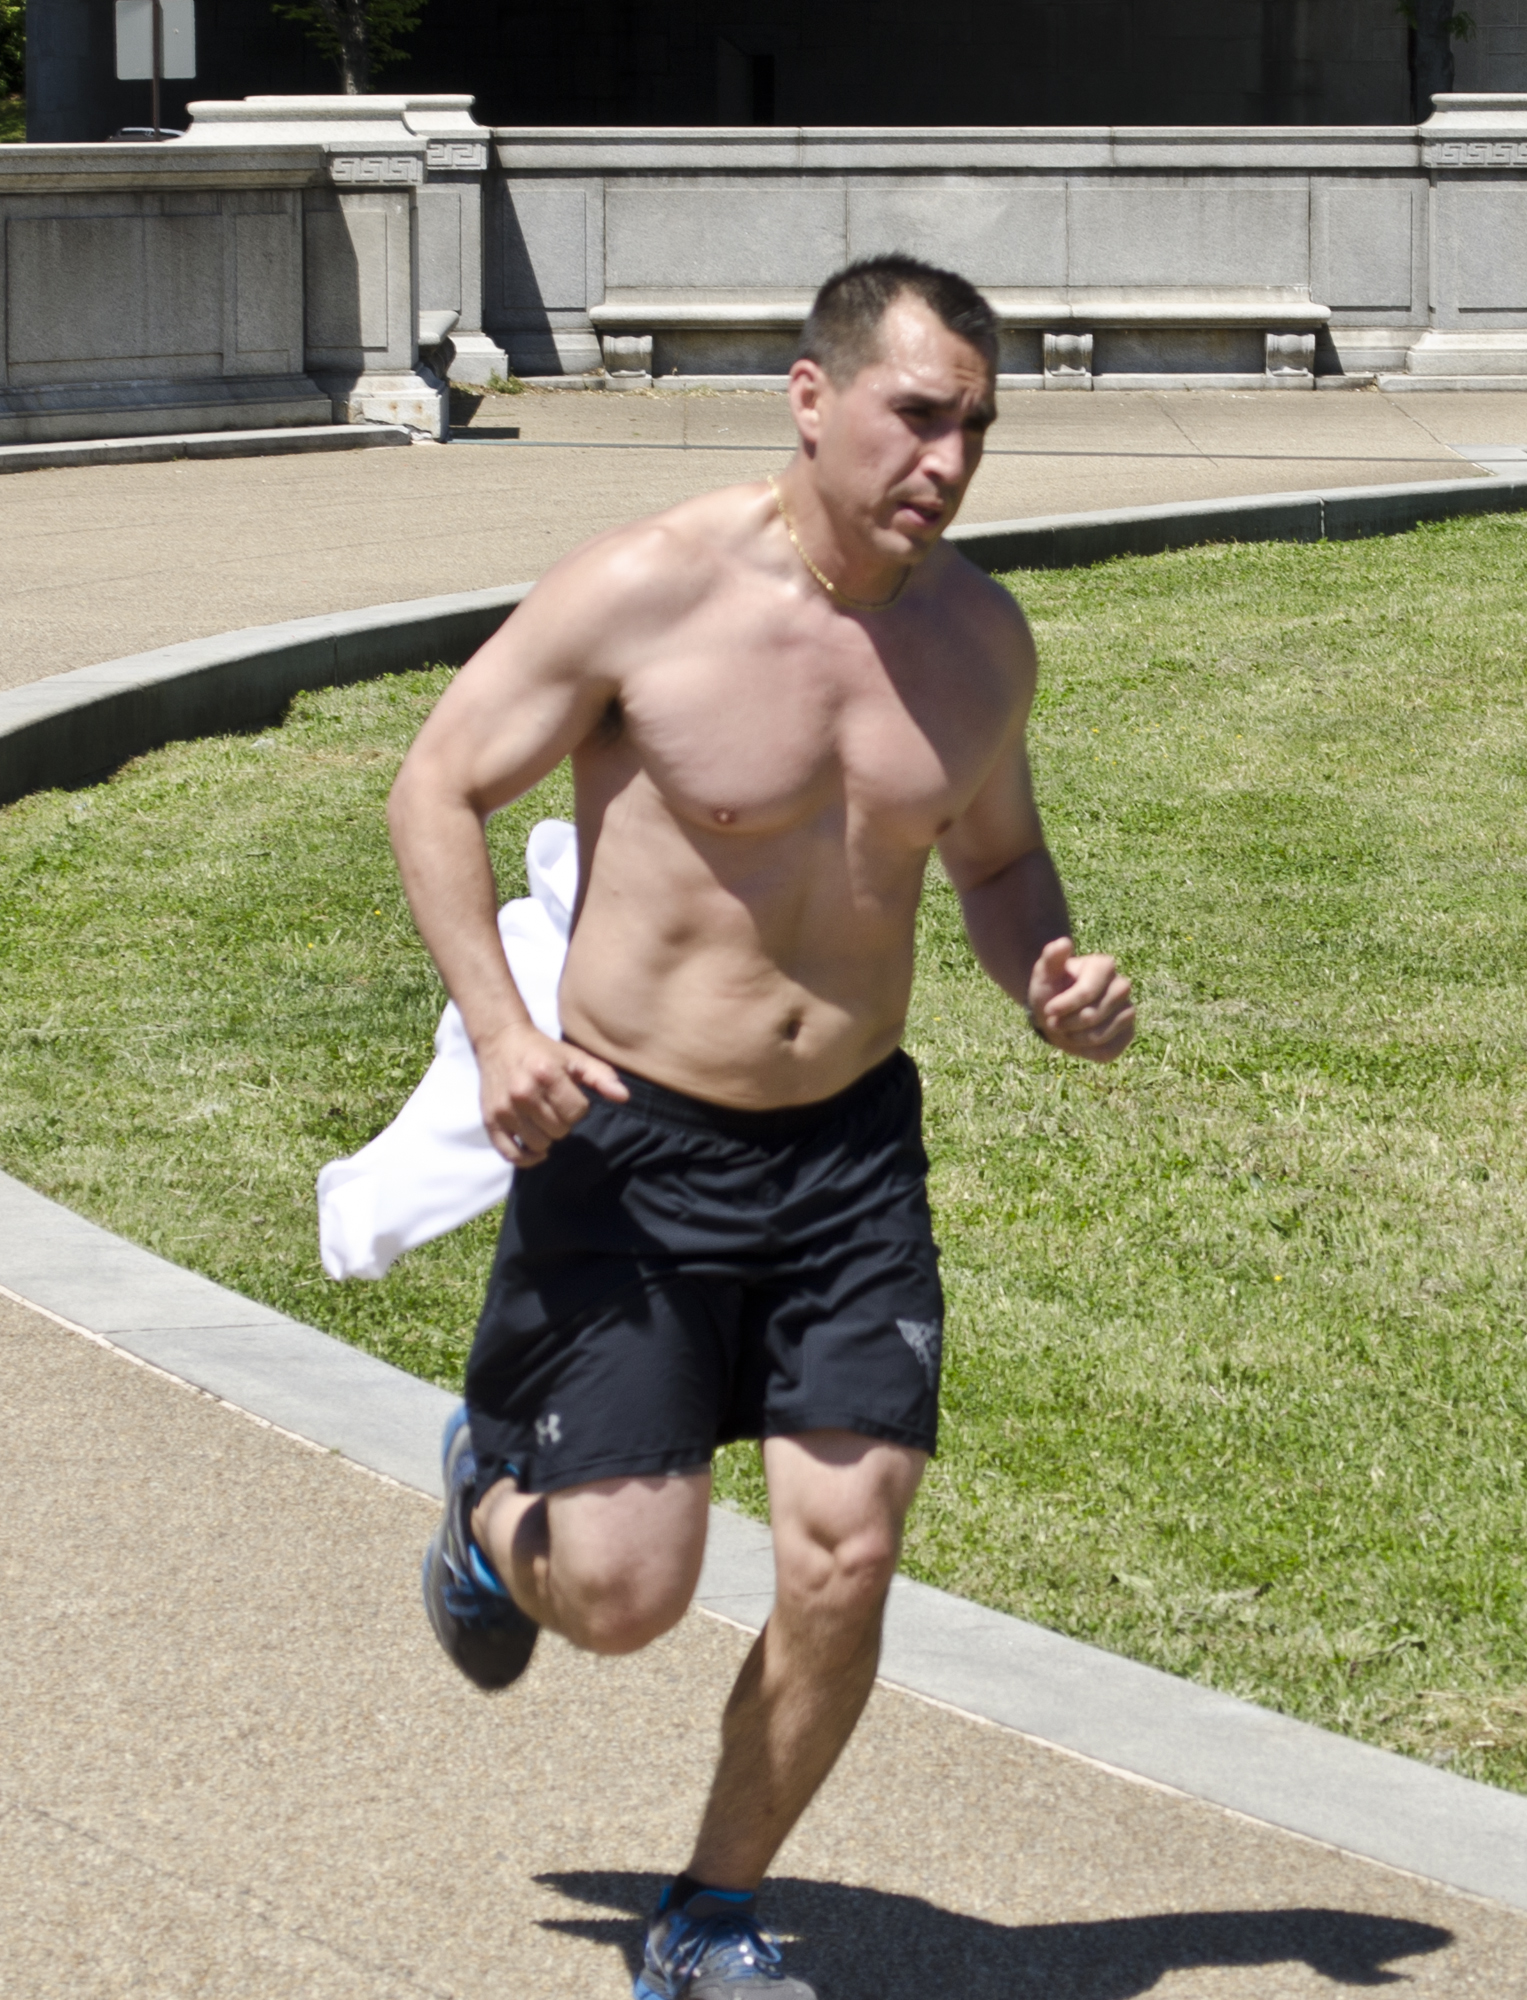 File:Muscular jogger - former Constitution Avenue NW 